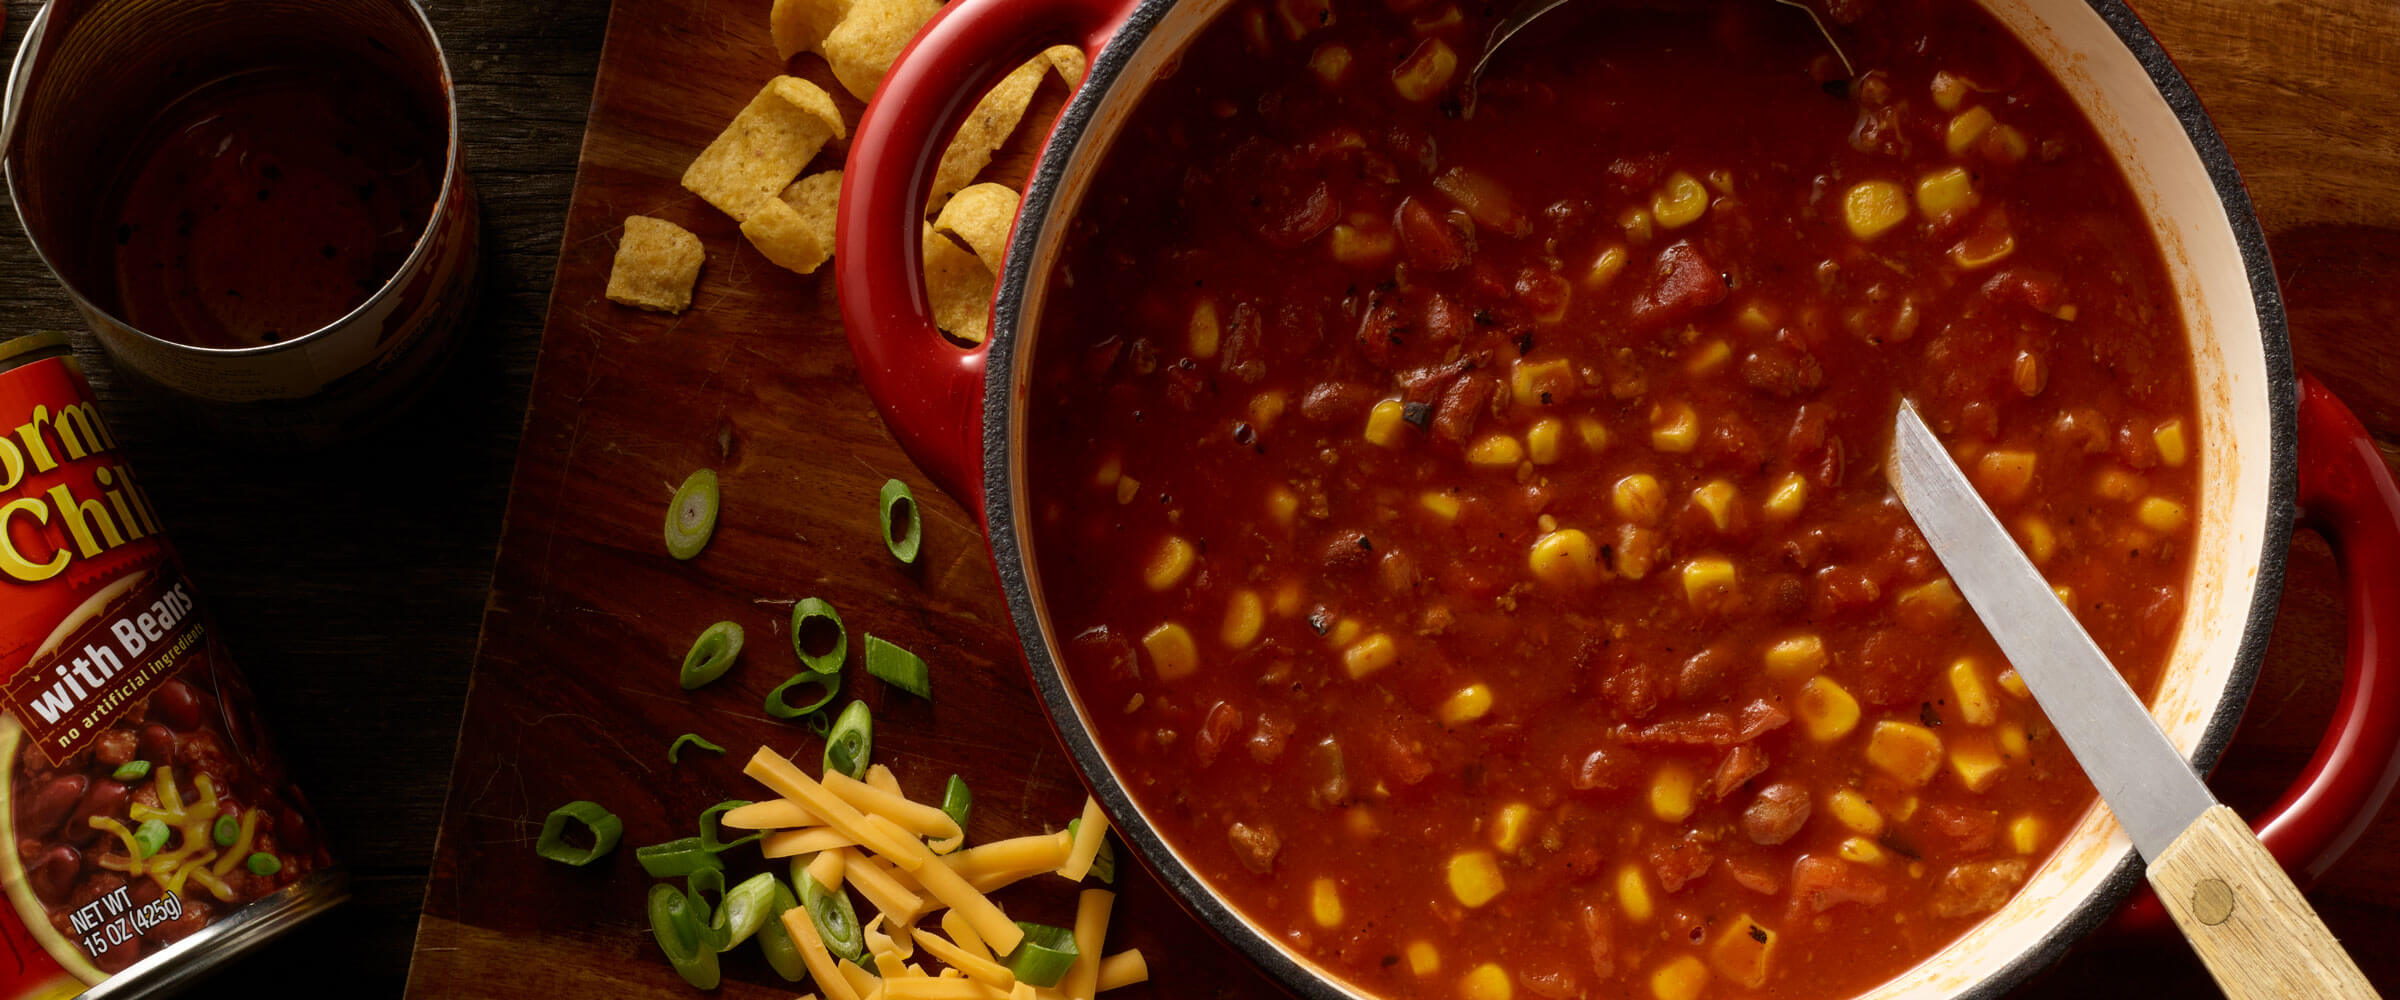 Chili with corn in red dish with serving spoon and toppings on the side